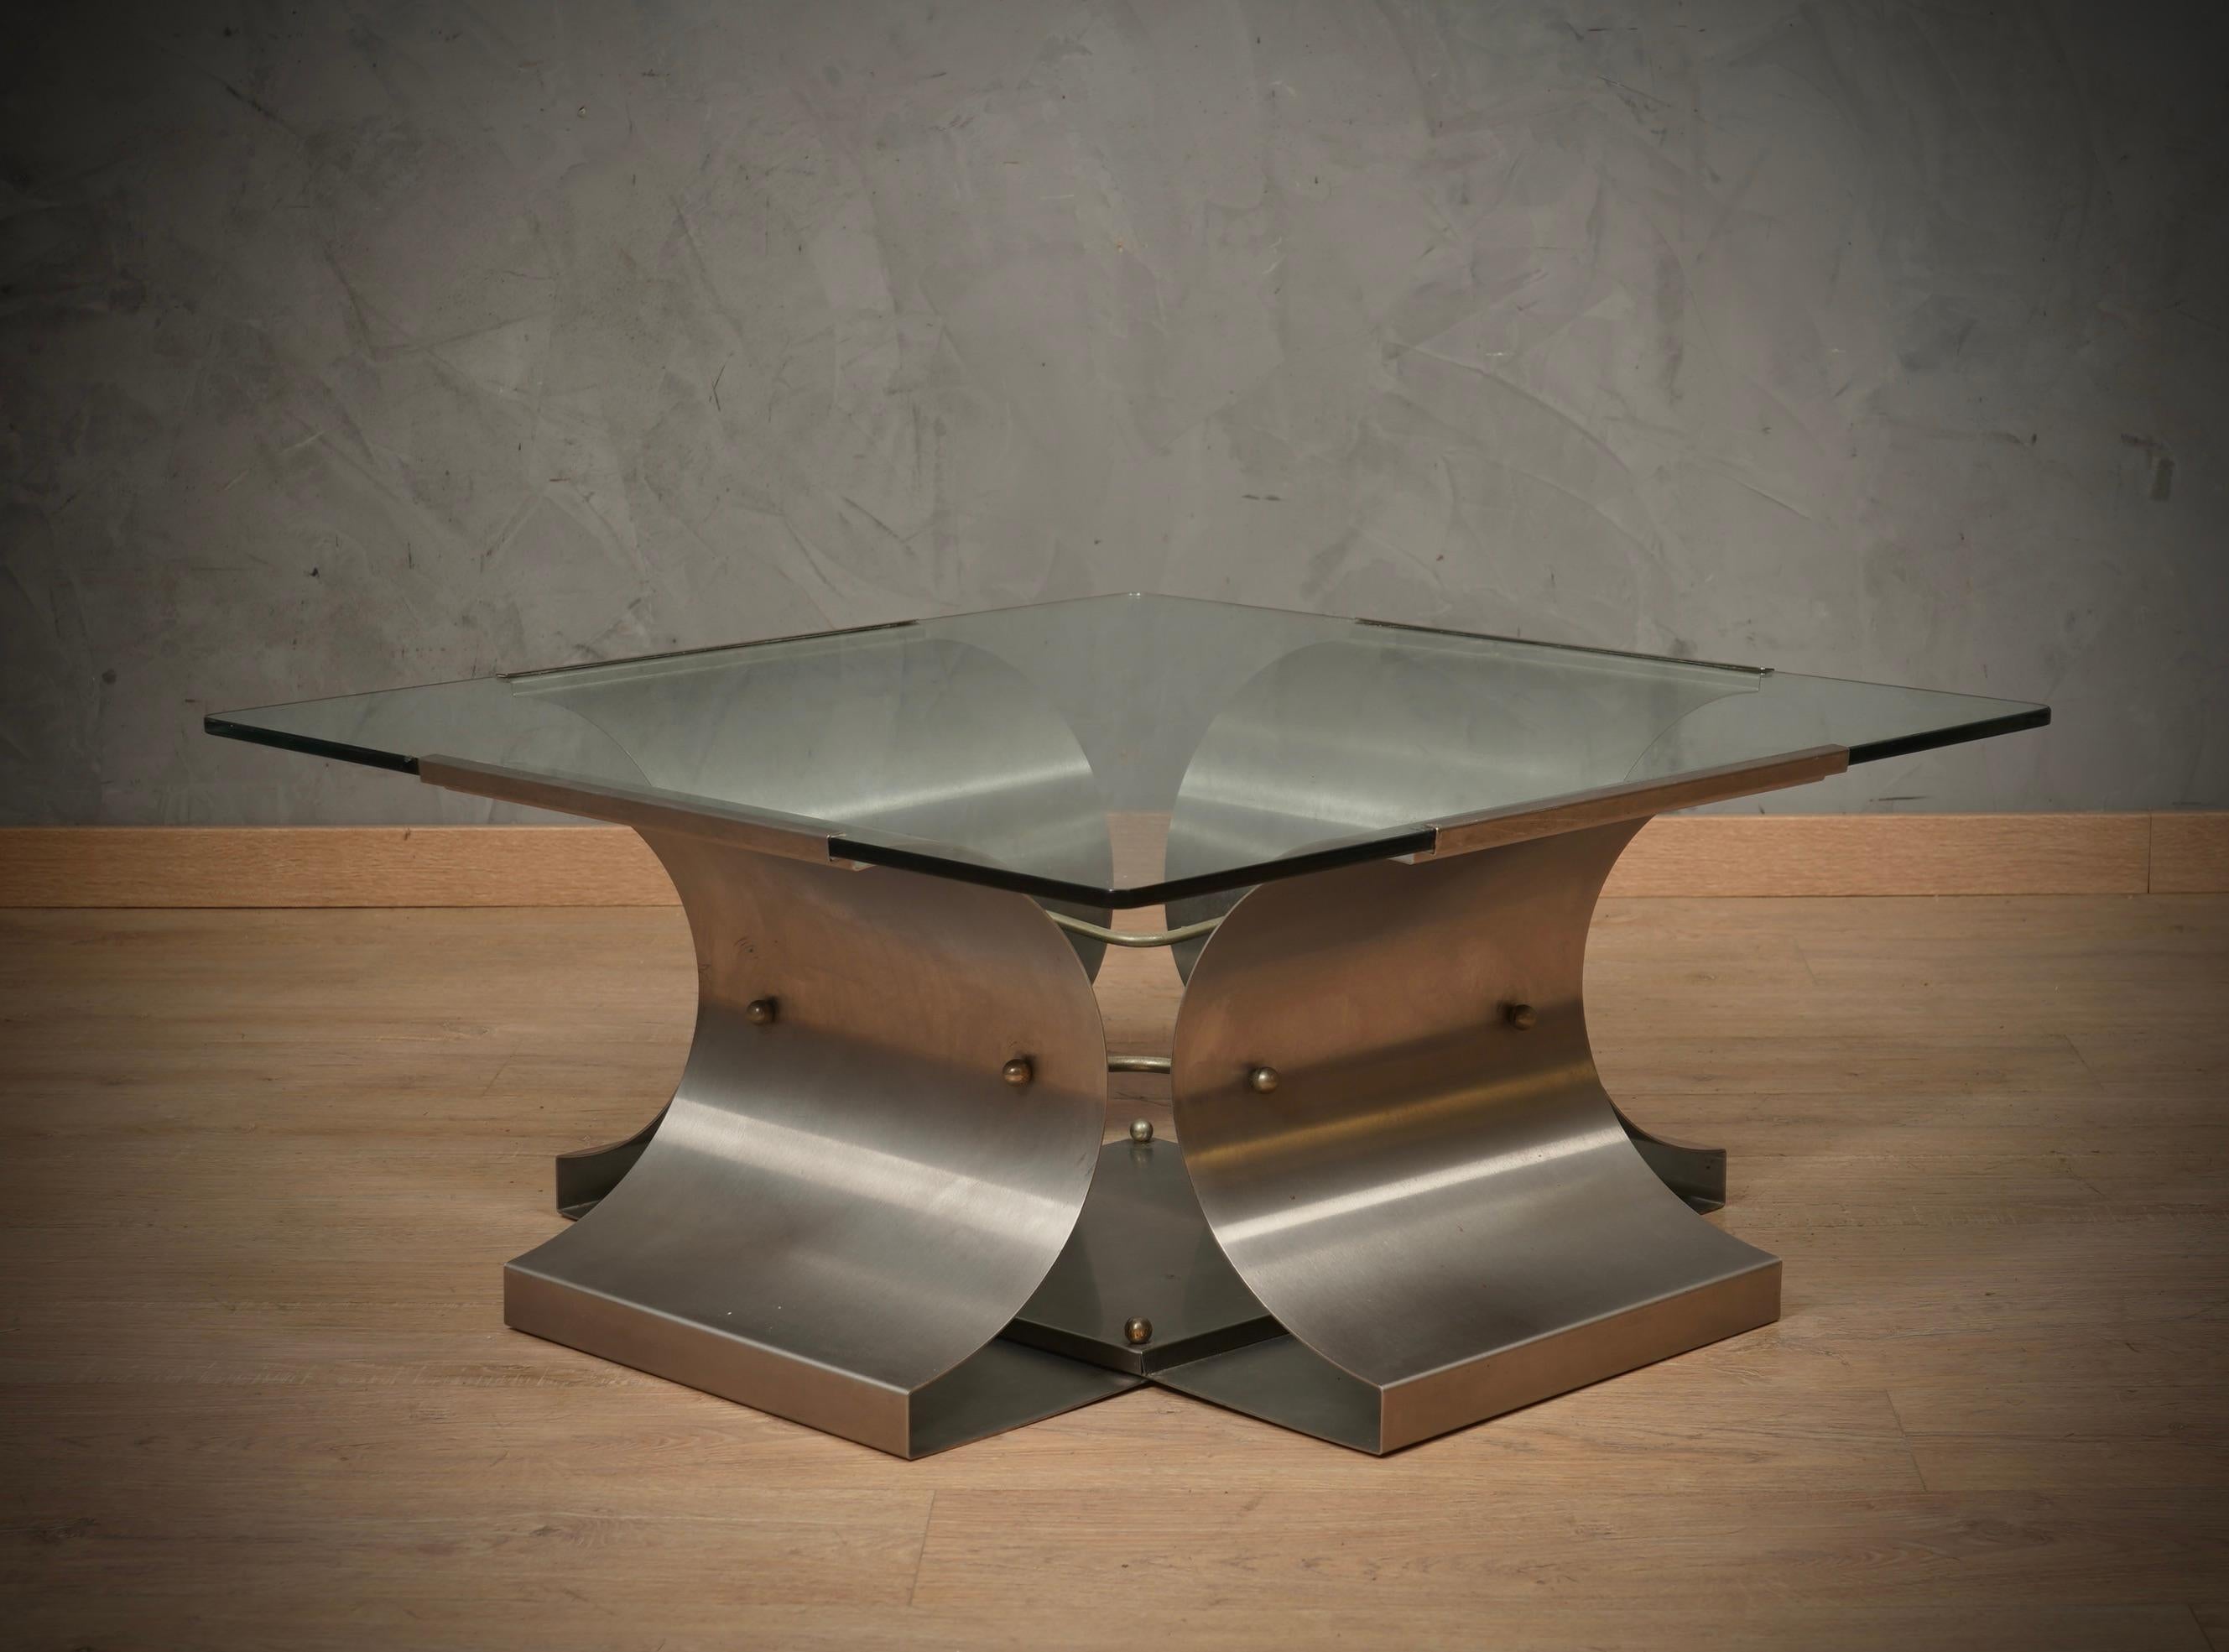 Important sofa table by Francois Monnet, innovative design and materials for that time period. Ingeniously designed, with its unique features and meticulous attention to detail, this table is a testament to Francois Monnet's innovative vision and